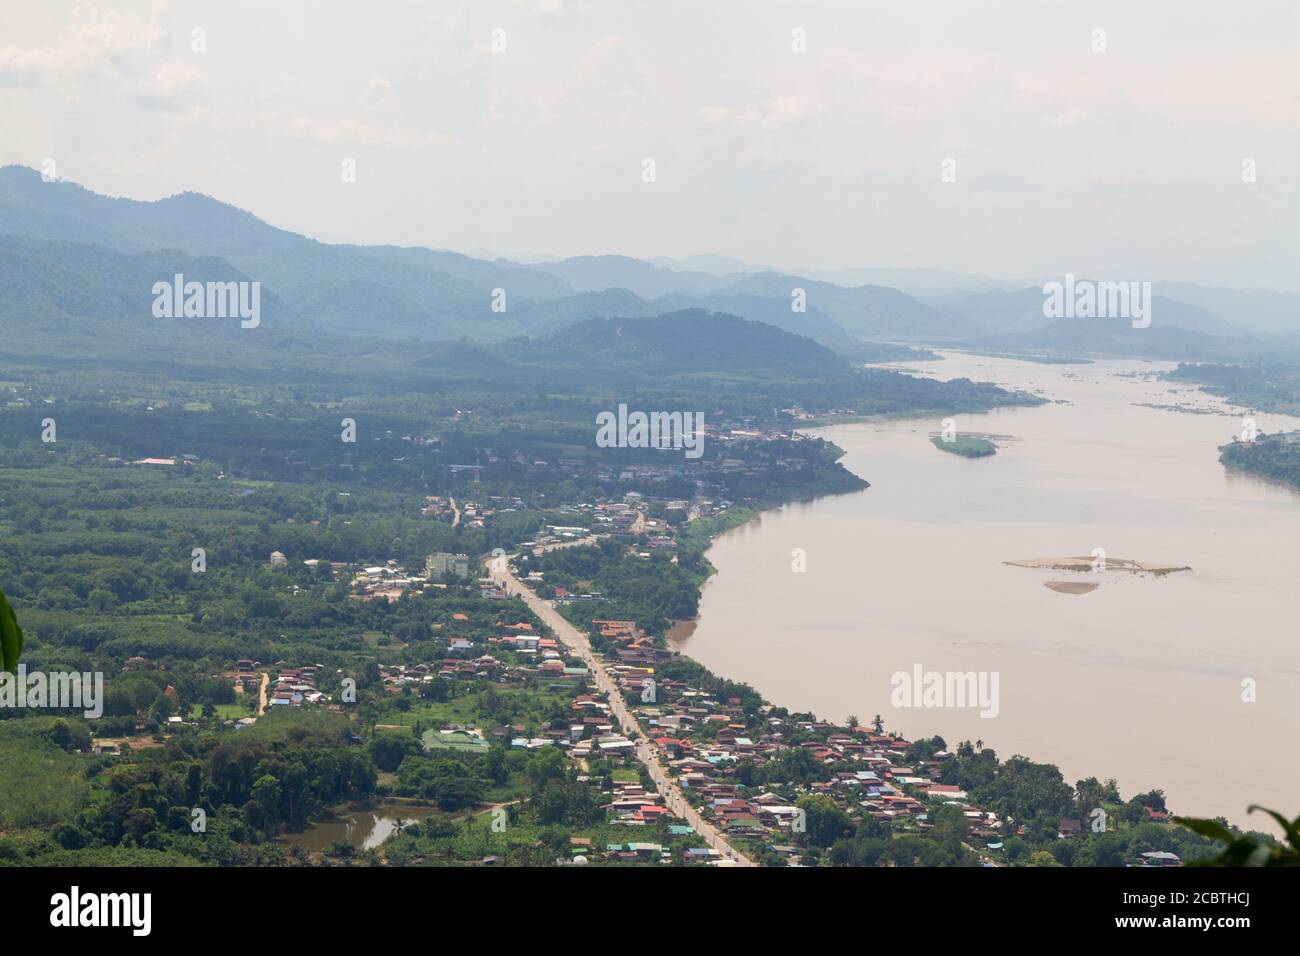 Laos area seen from above There is a Mekong River divided between Thailand and Laos. Saw a small village along the Mekong River Stock Photo